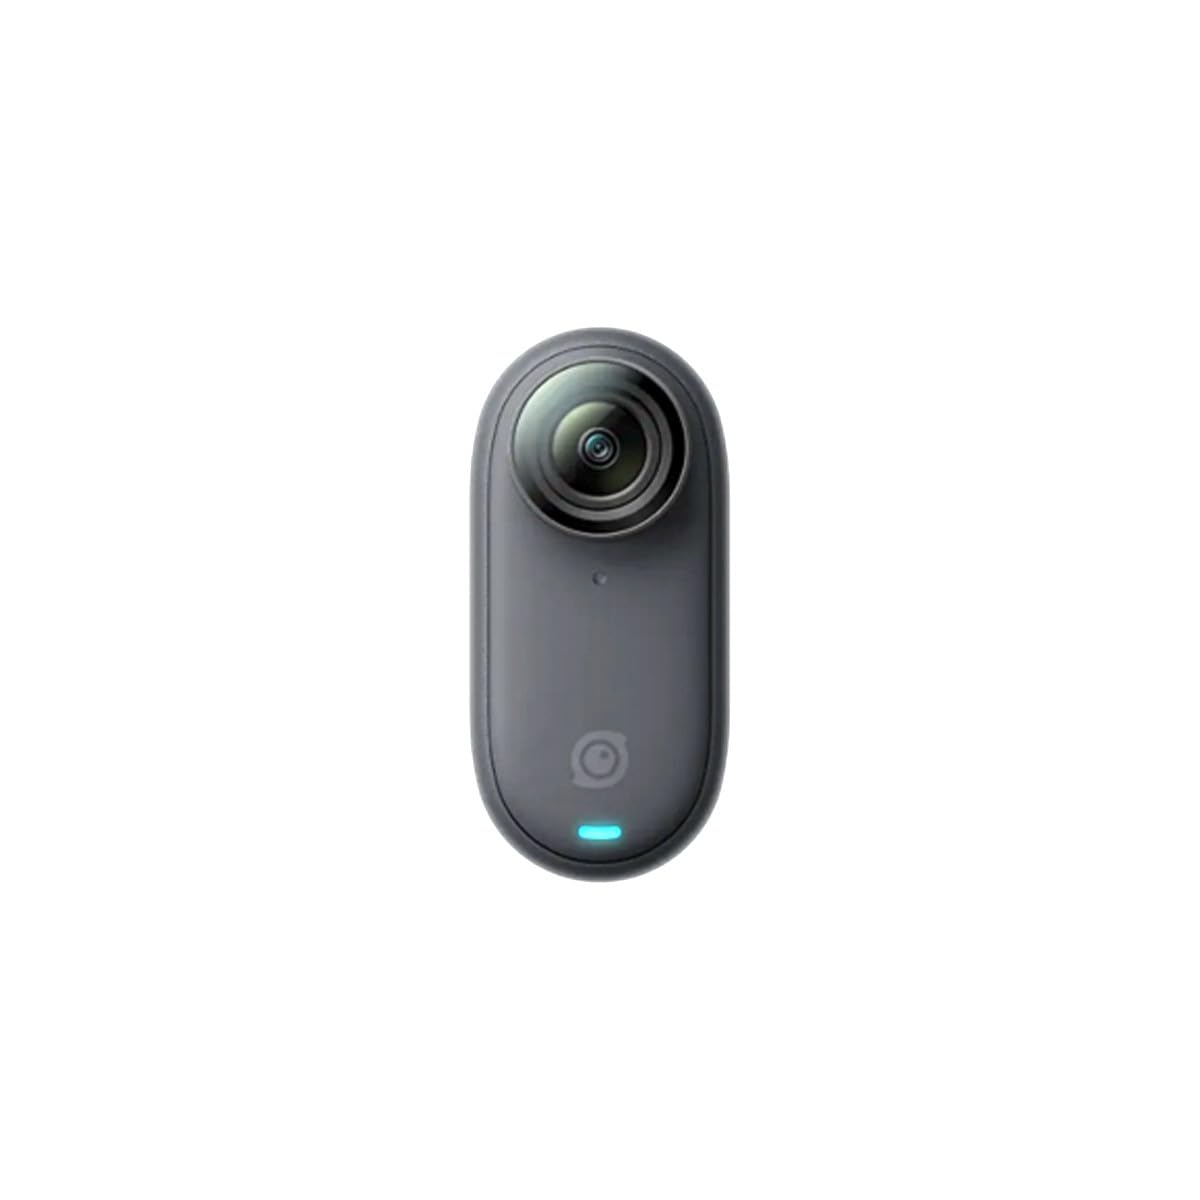 Insta360 GO 3 Midnight Black (128GB) – Small & Lightweight Action Camera, Portable and Versatile, Hands-Free POV, Mount Anywhere, Stabilization, Multifunctional Action Pod, Waterproof